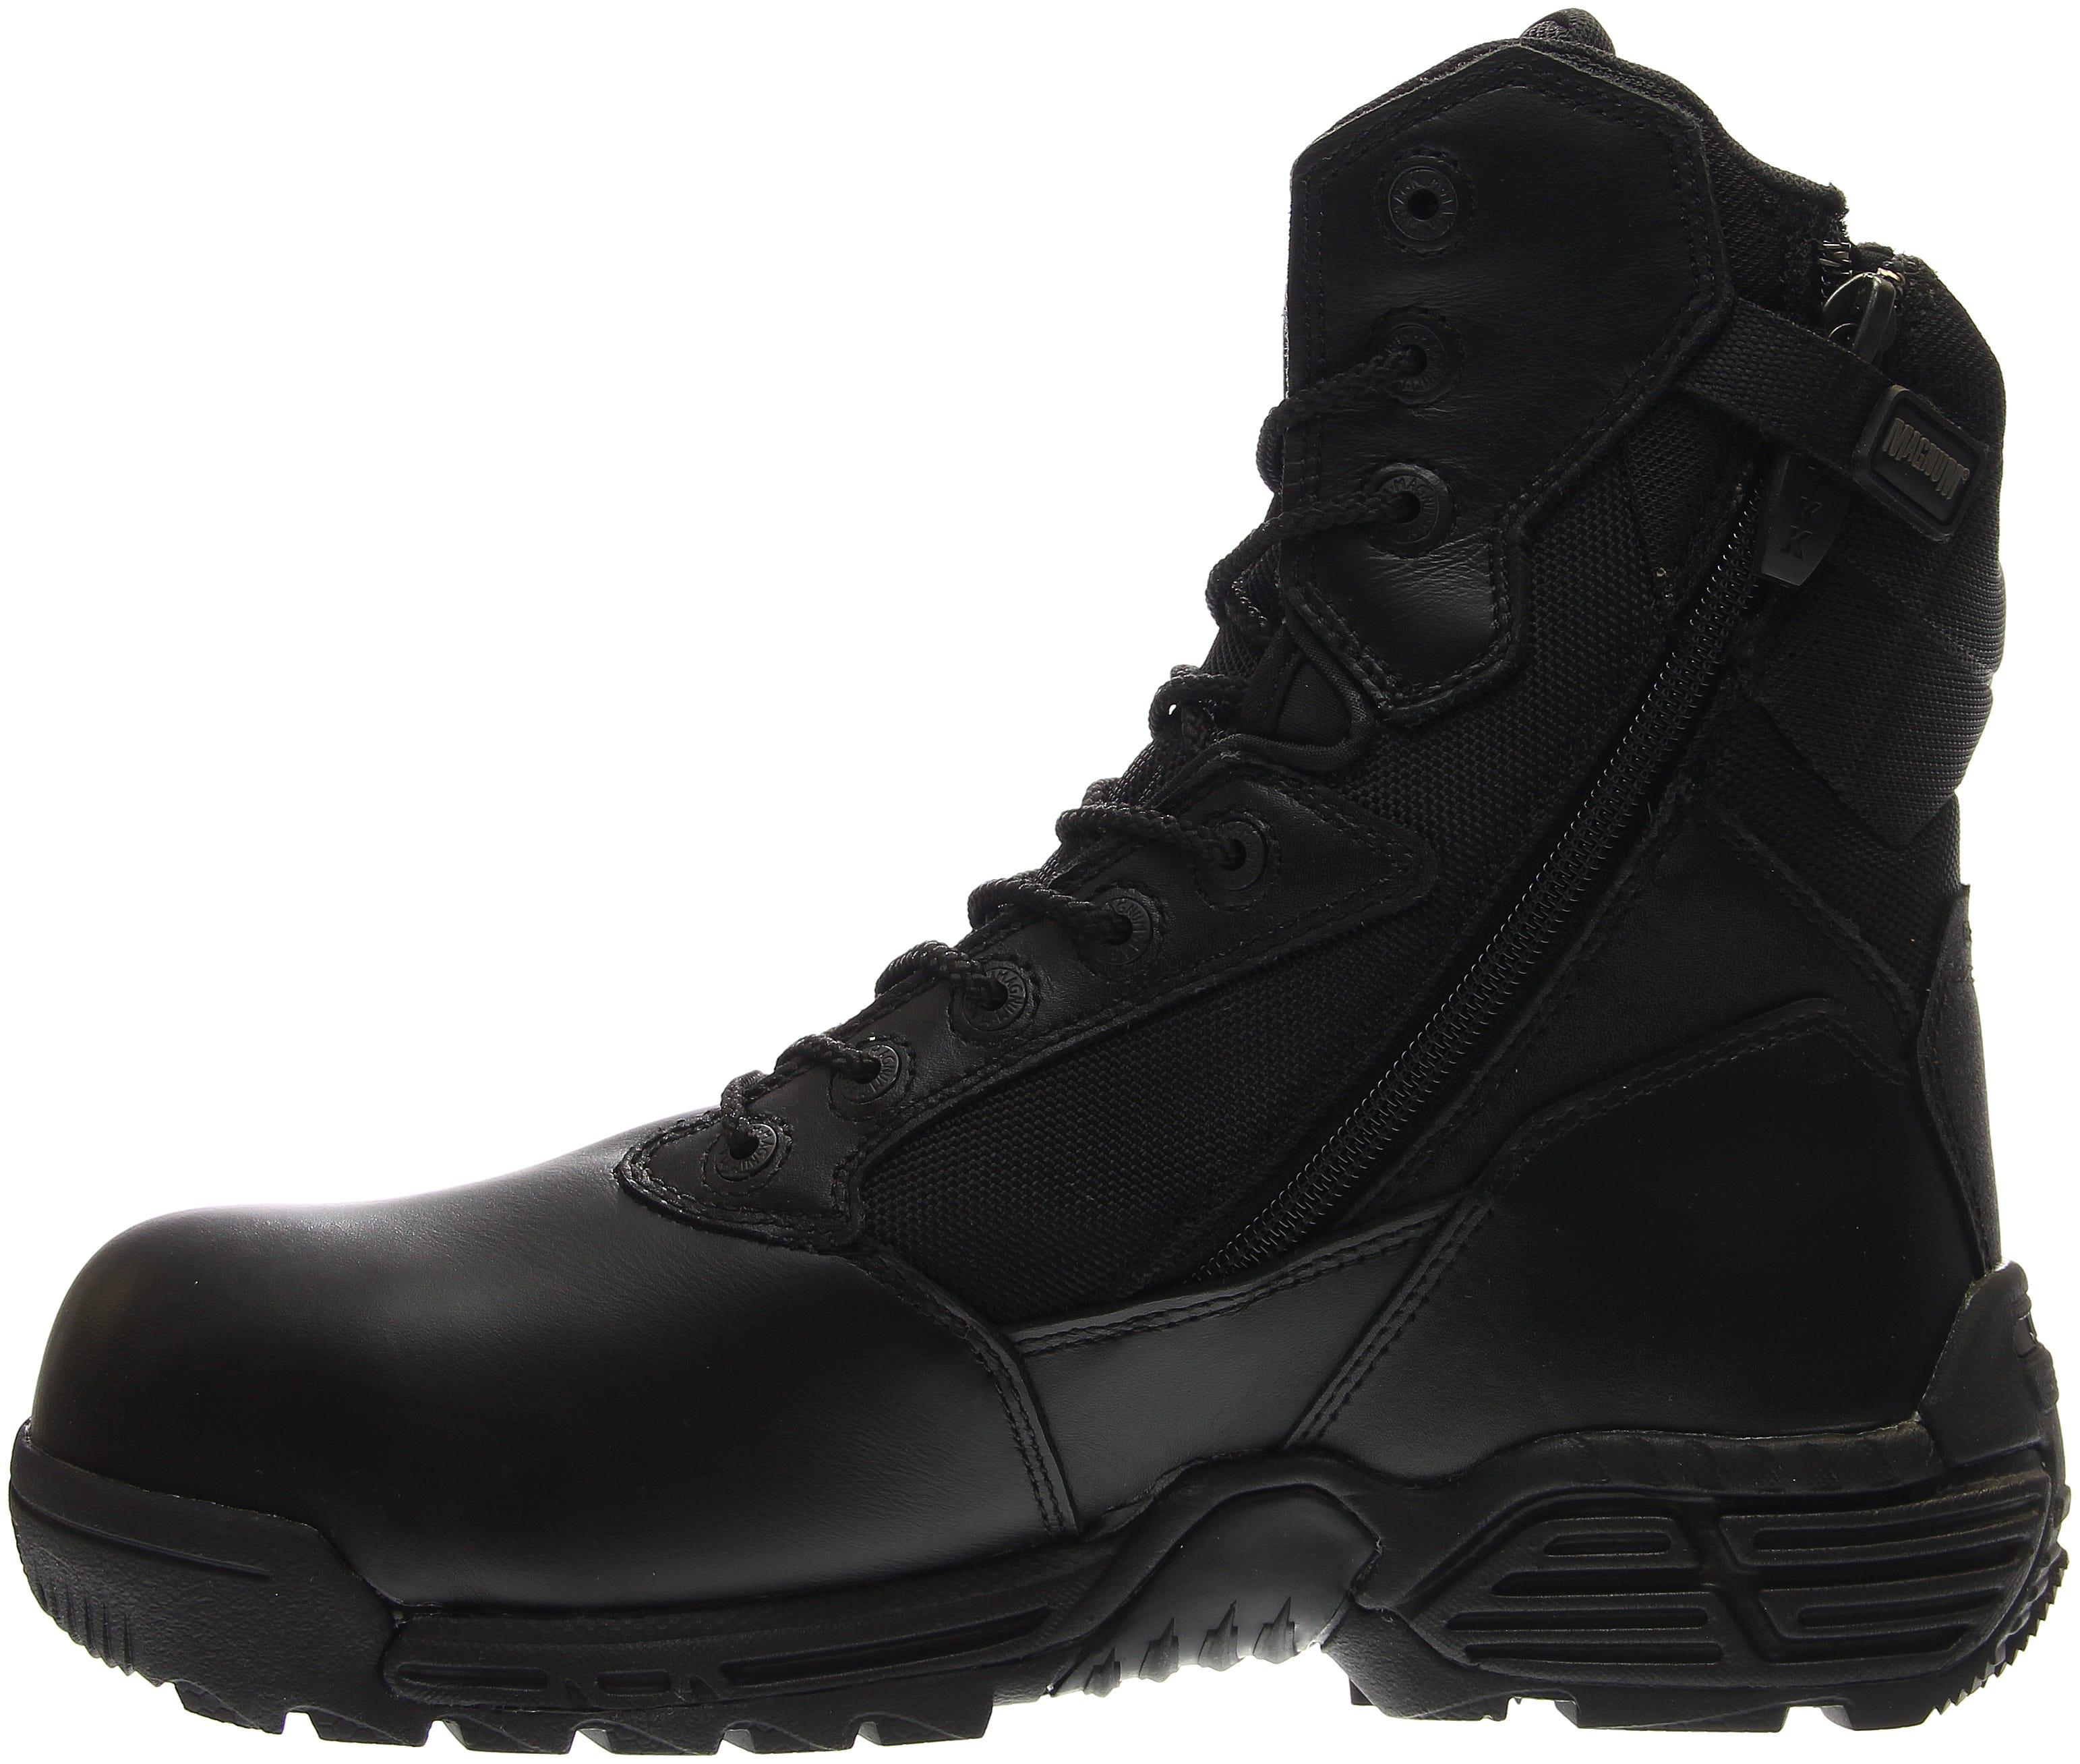 magnum composite safety boots